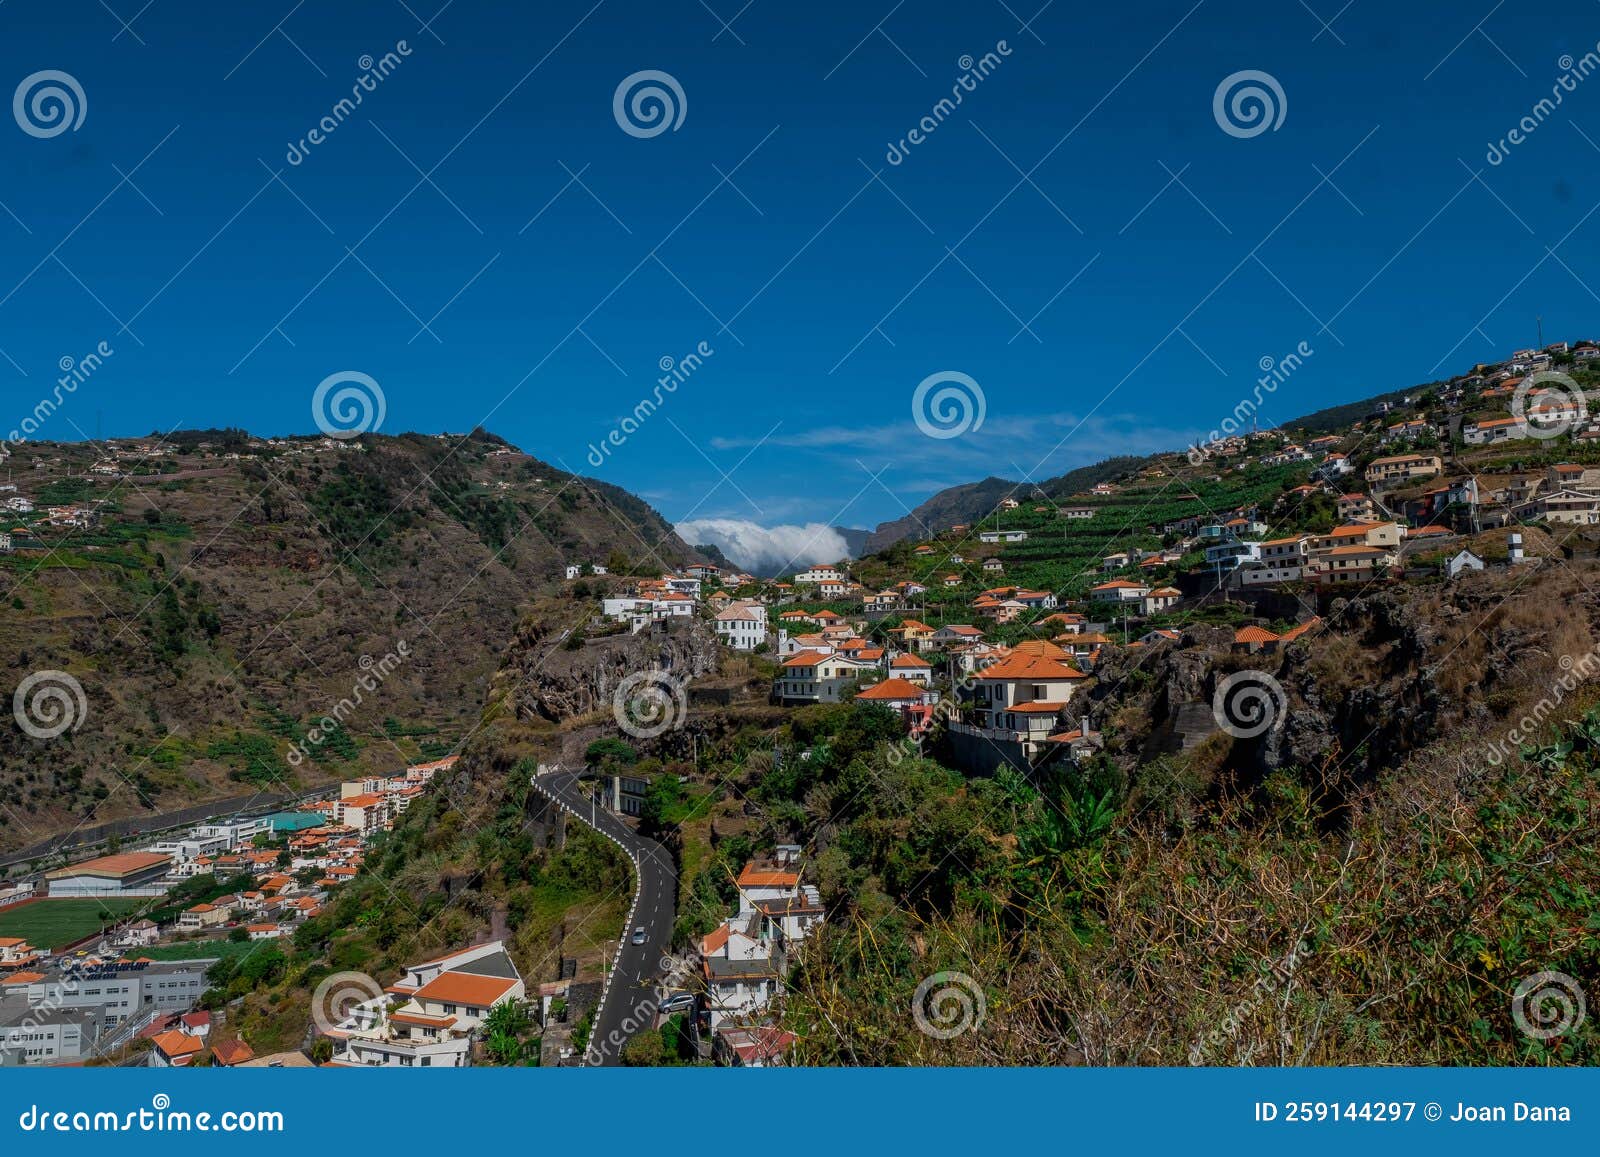 the town of riveira brava from the viewpoint of san sebastian